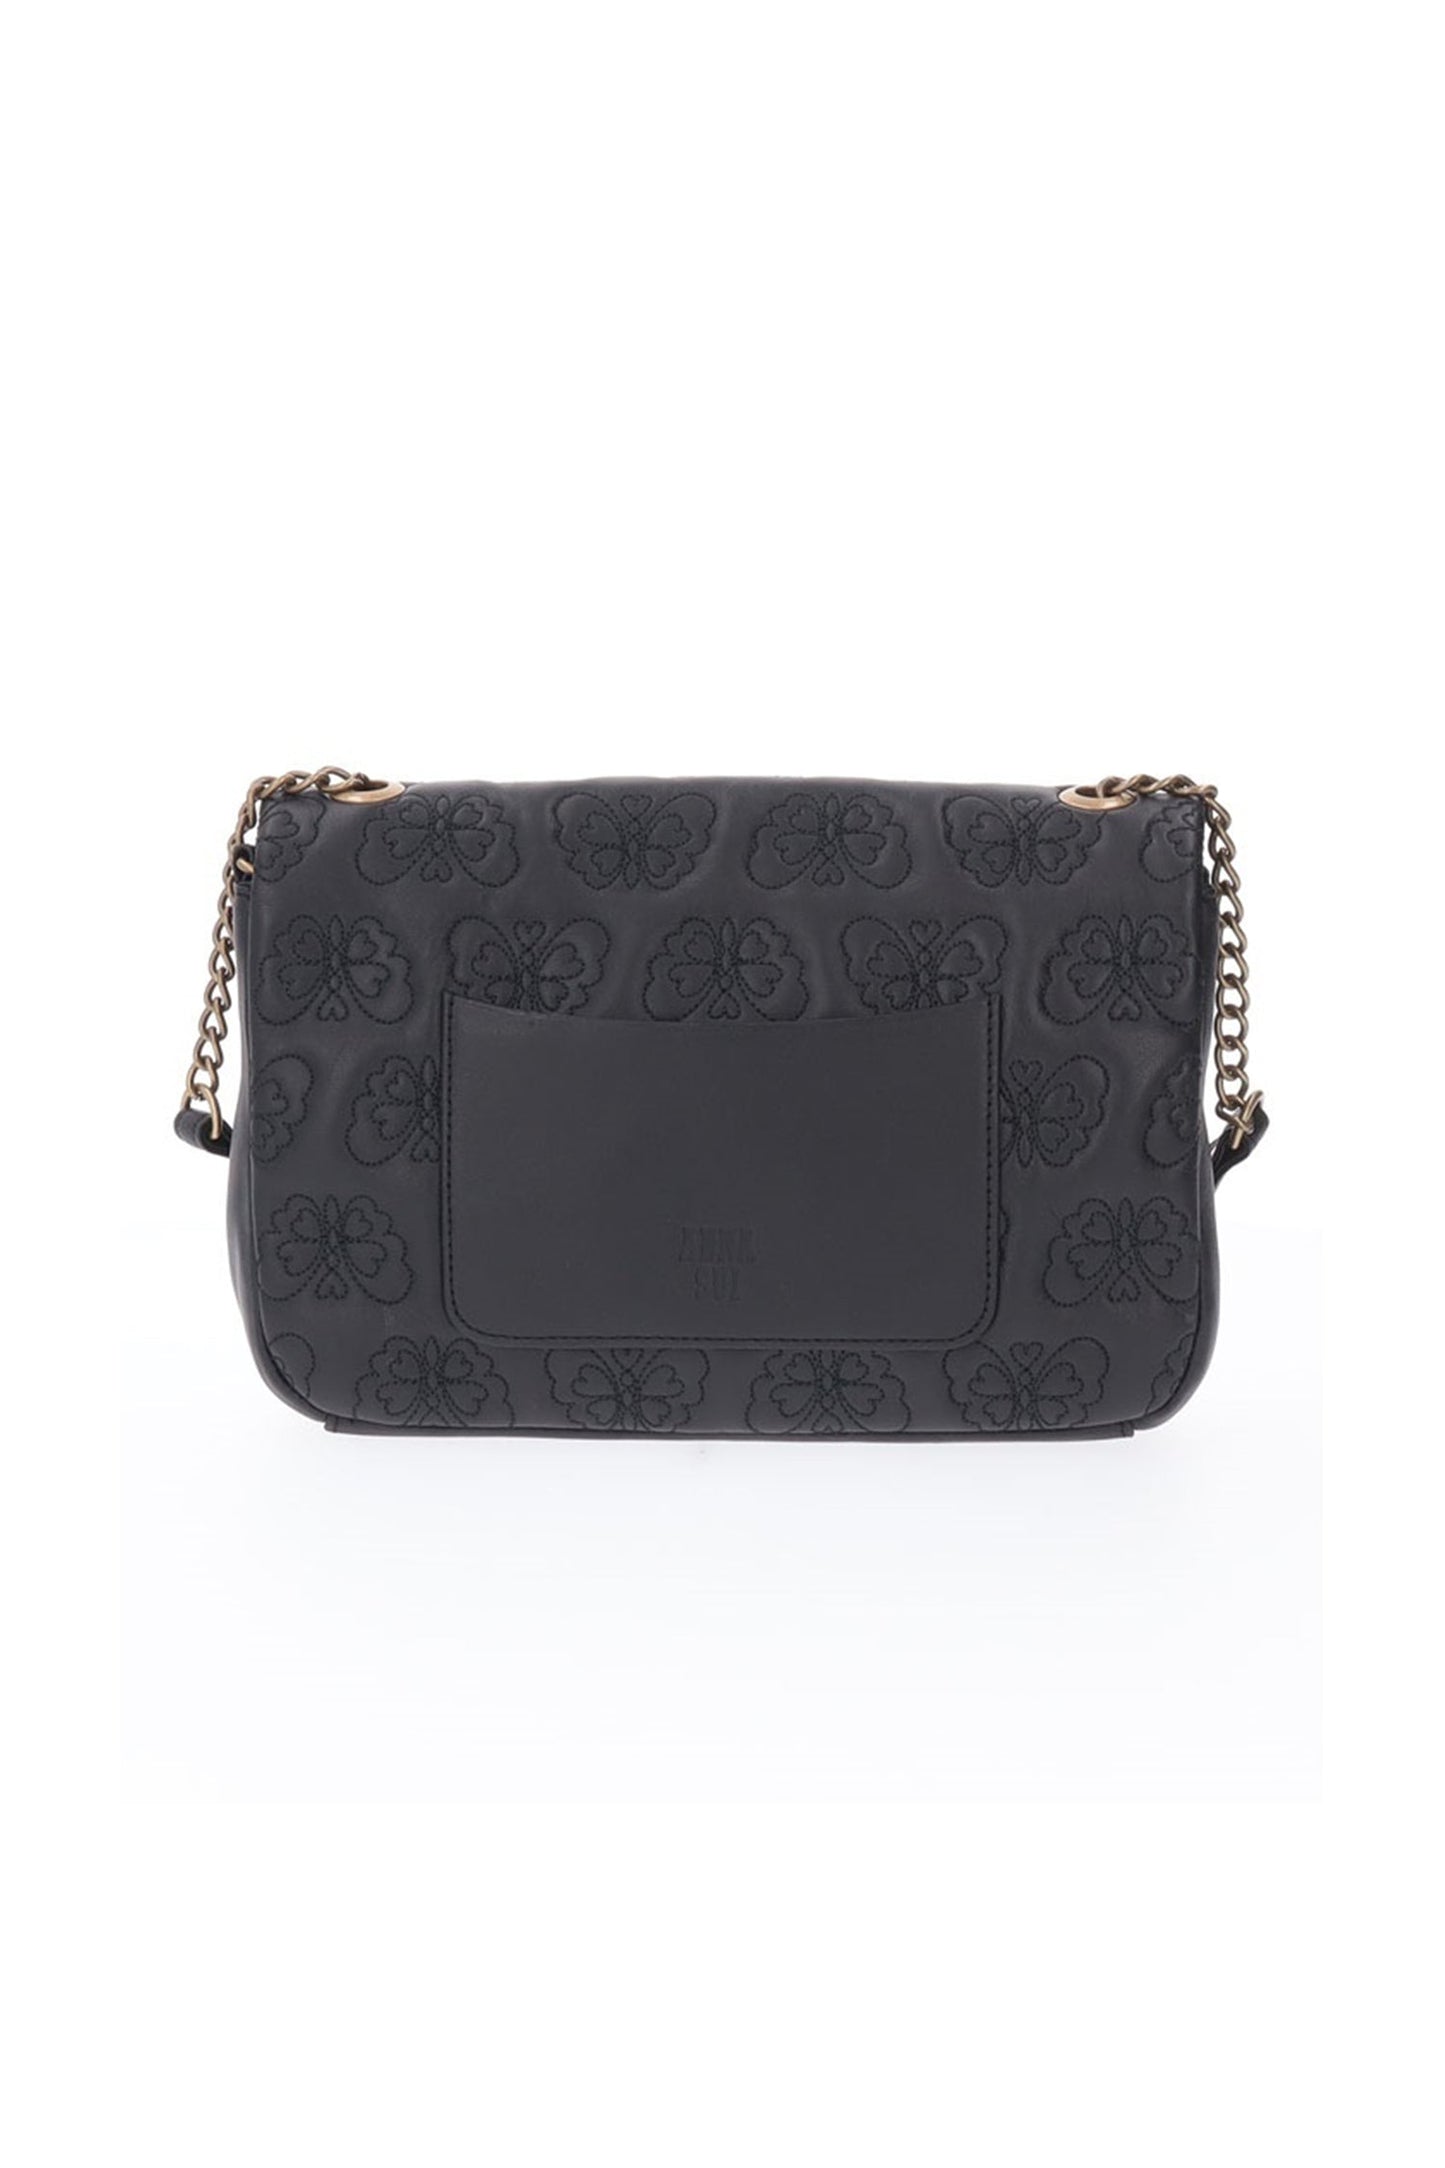 Chase Crossbody leather embossed with Anna Sui signature butterflies, a side pocket on the back